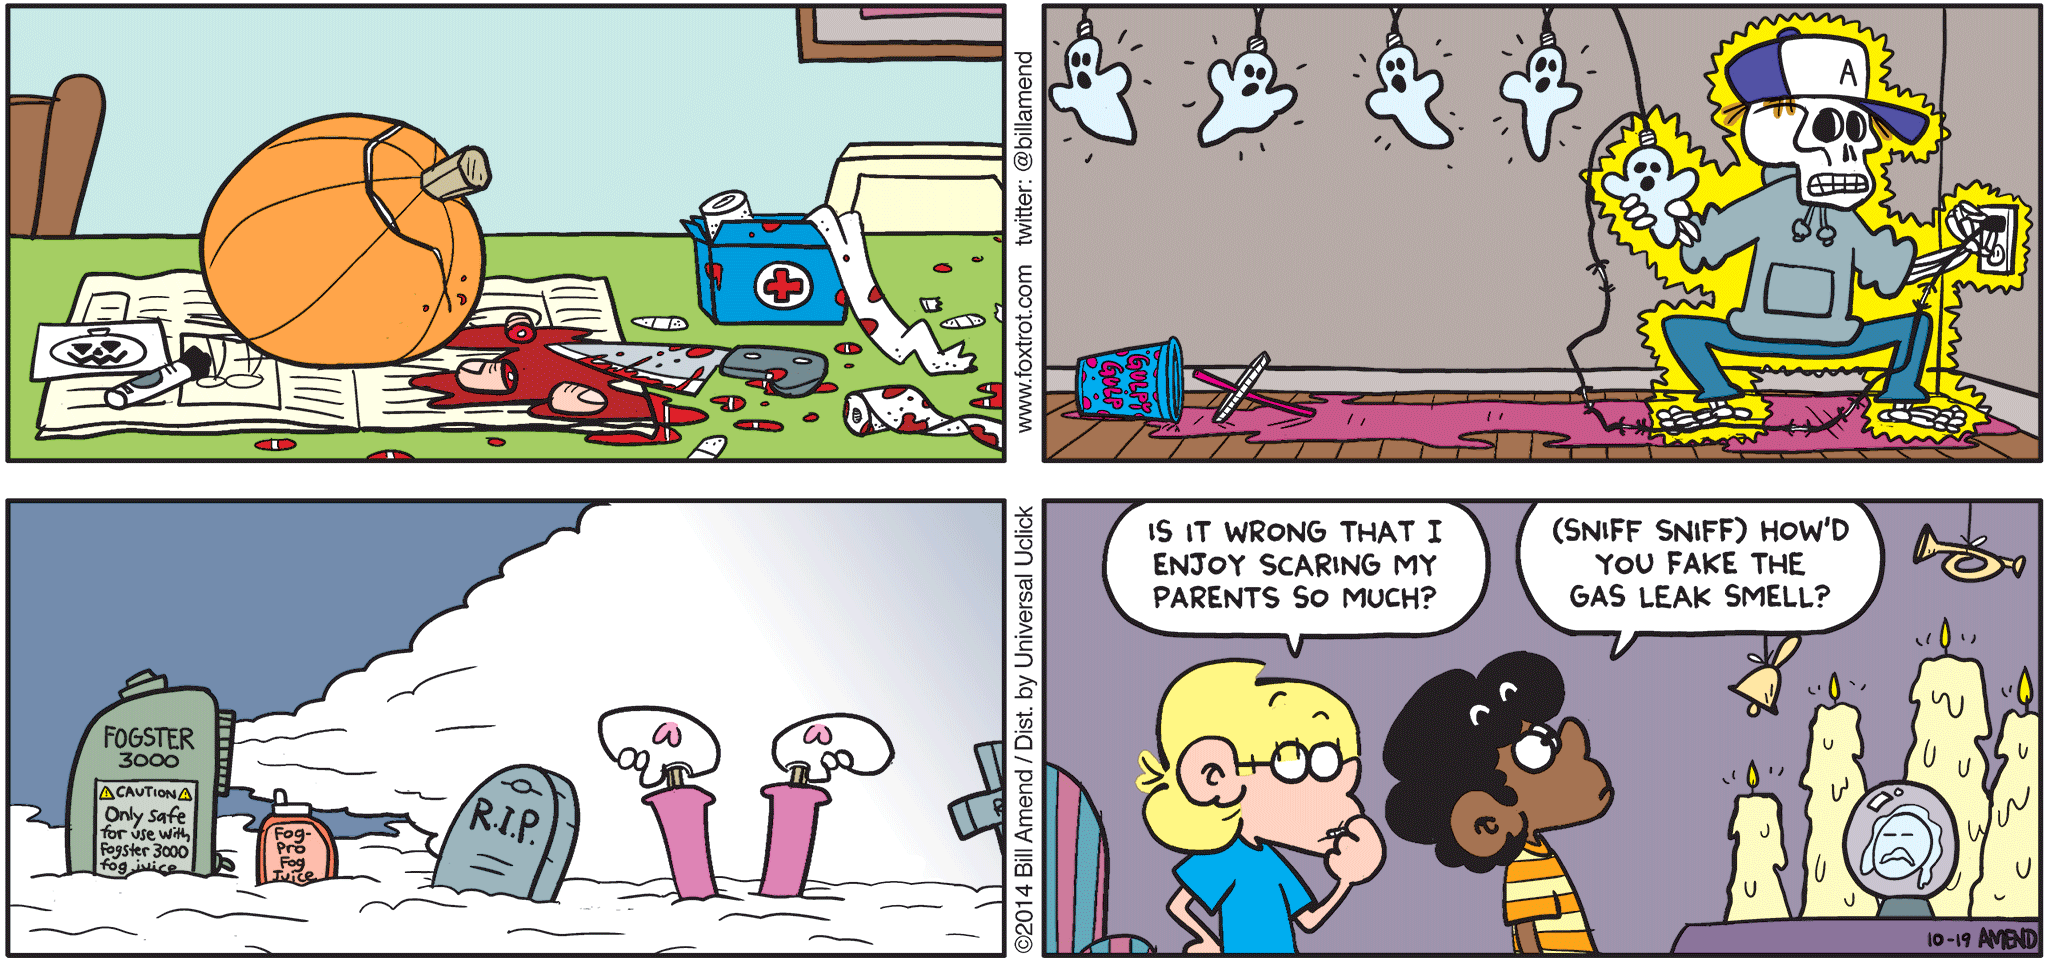 FoxTrot by Bill Amend - "Halloween Horrors" published October 19, 2014 - Jason: Is it wrong that I enjoy scaring my parents to much? Marcus: (sniff sniff) How'd you fake the gas leak smell?